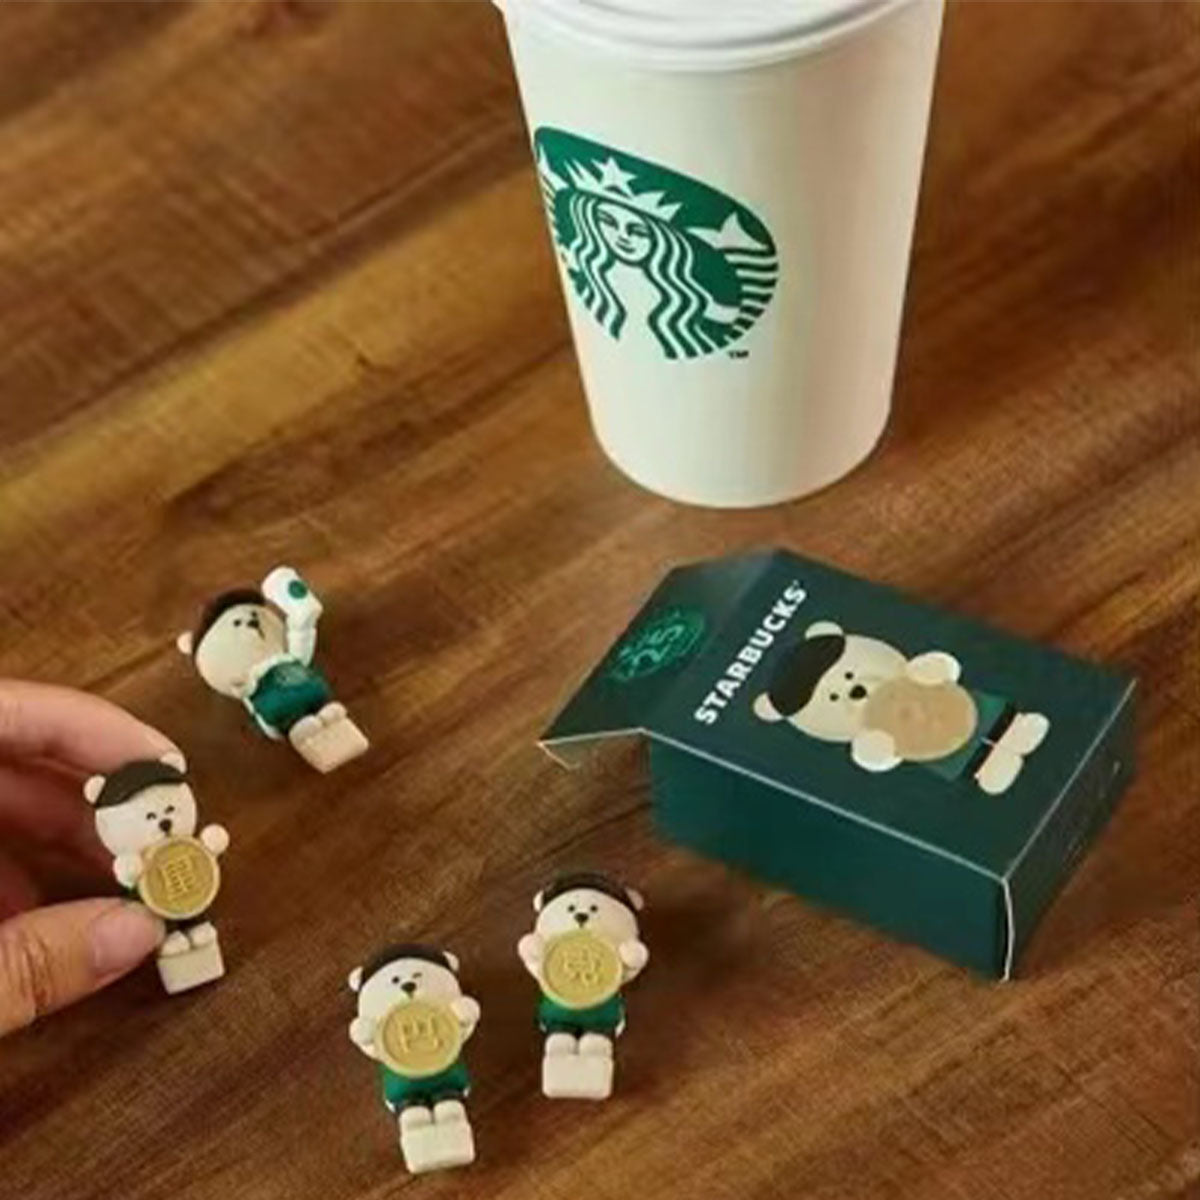 Starbucks Taiwan 2023 blind box lid plug stopper one box only contains